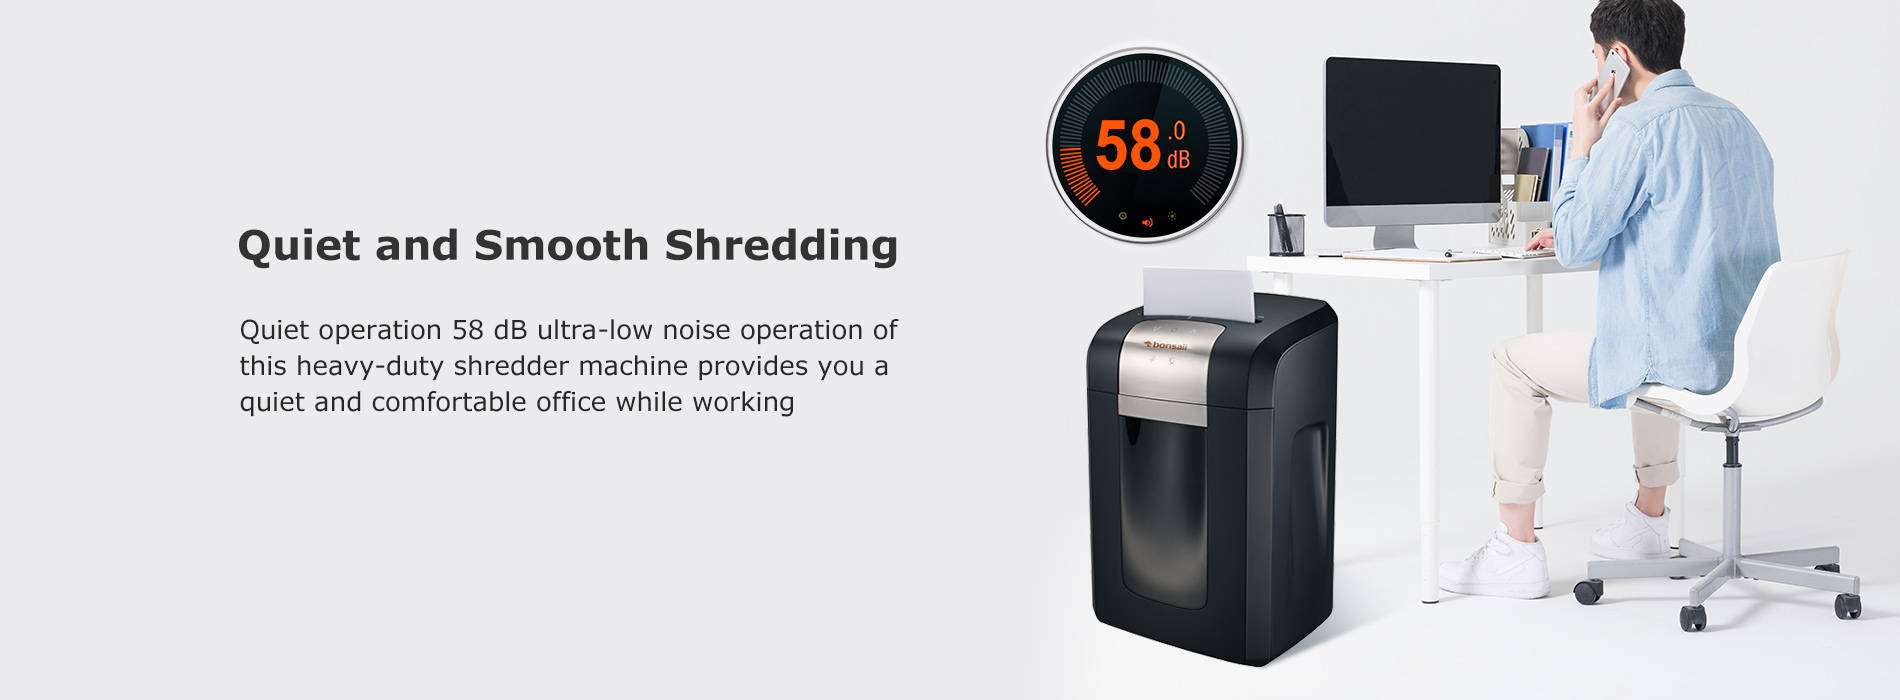 Quiet and Smooth Shredding Quiet operation 58 dB ultra-low noise operation of this heavy-duty shredder machine provides you a quiet and comfortable office while working